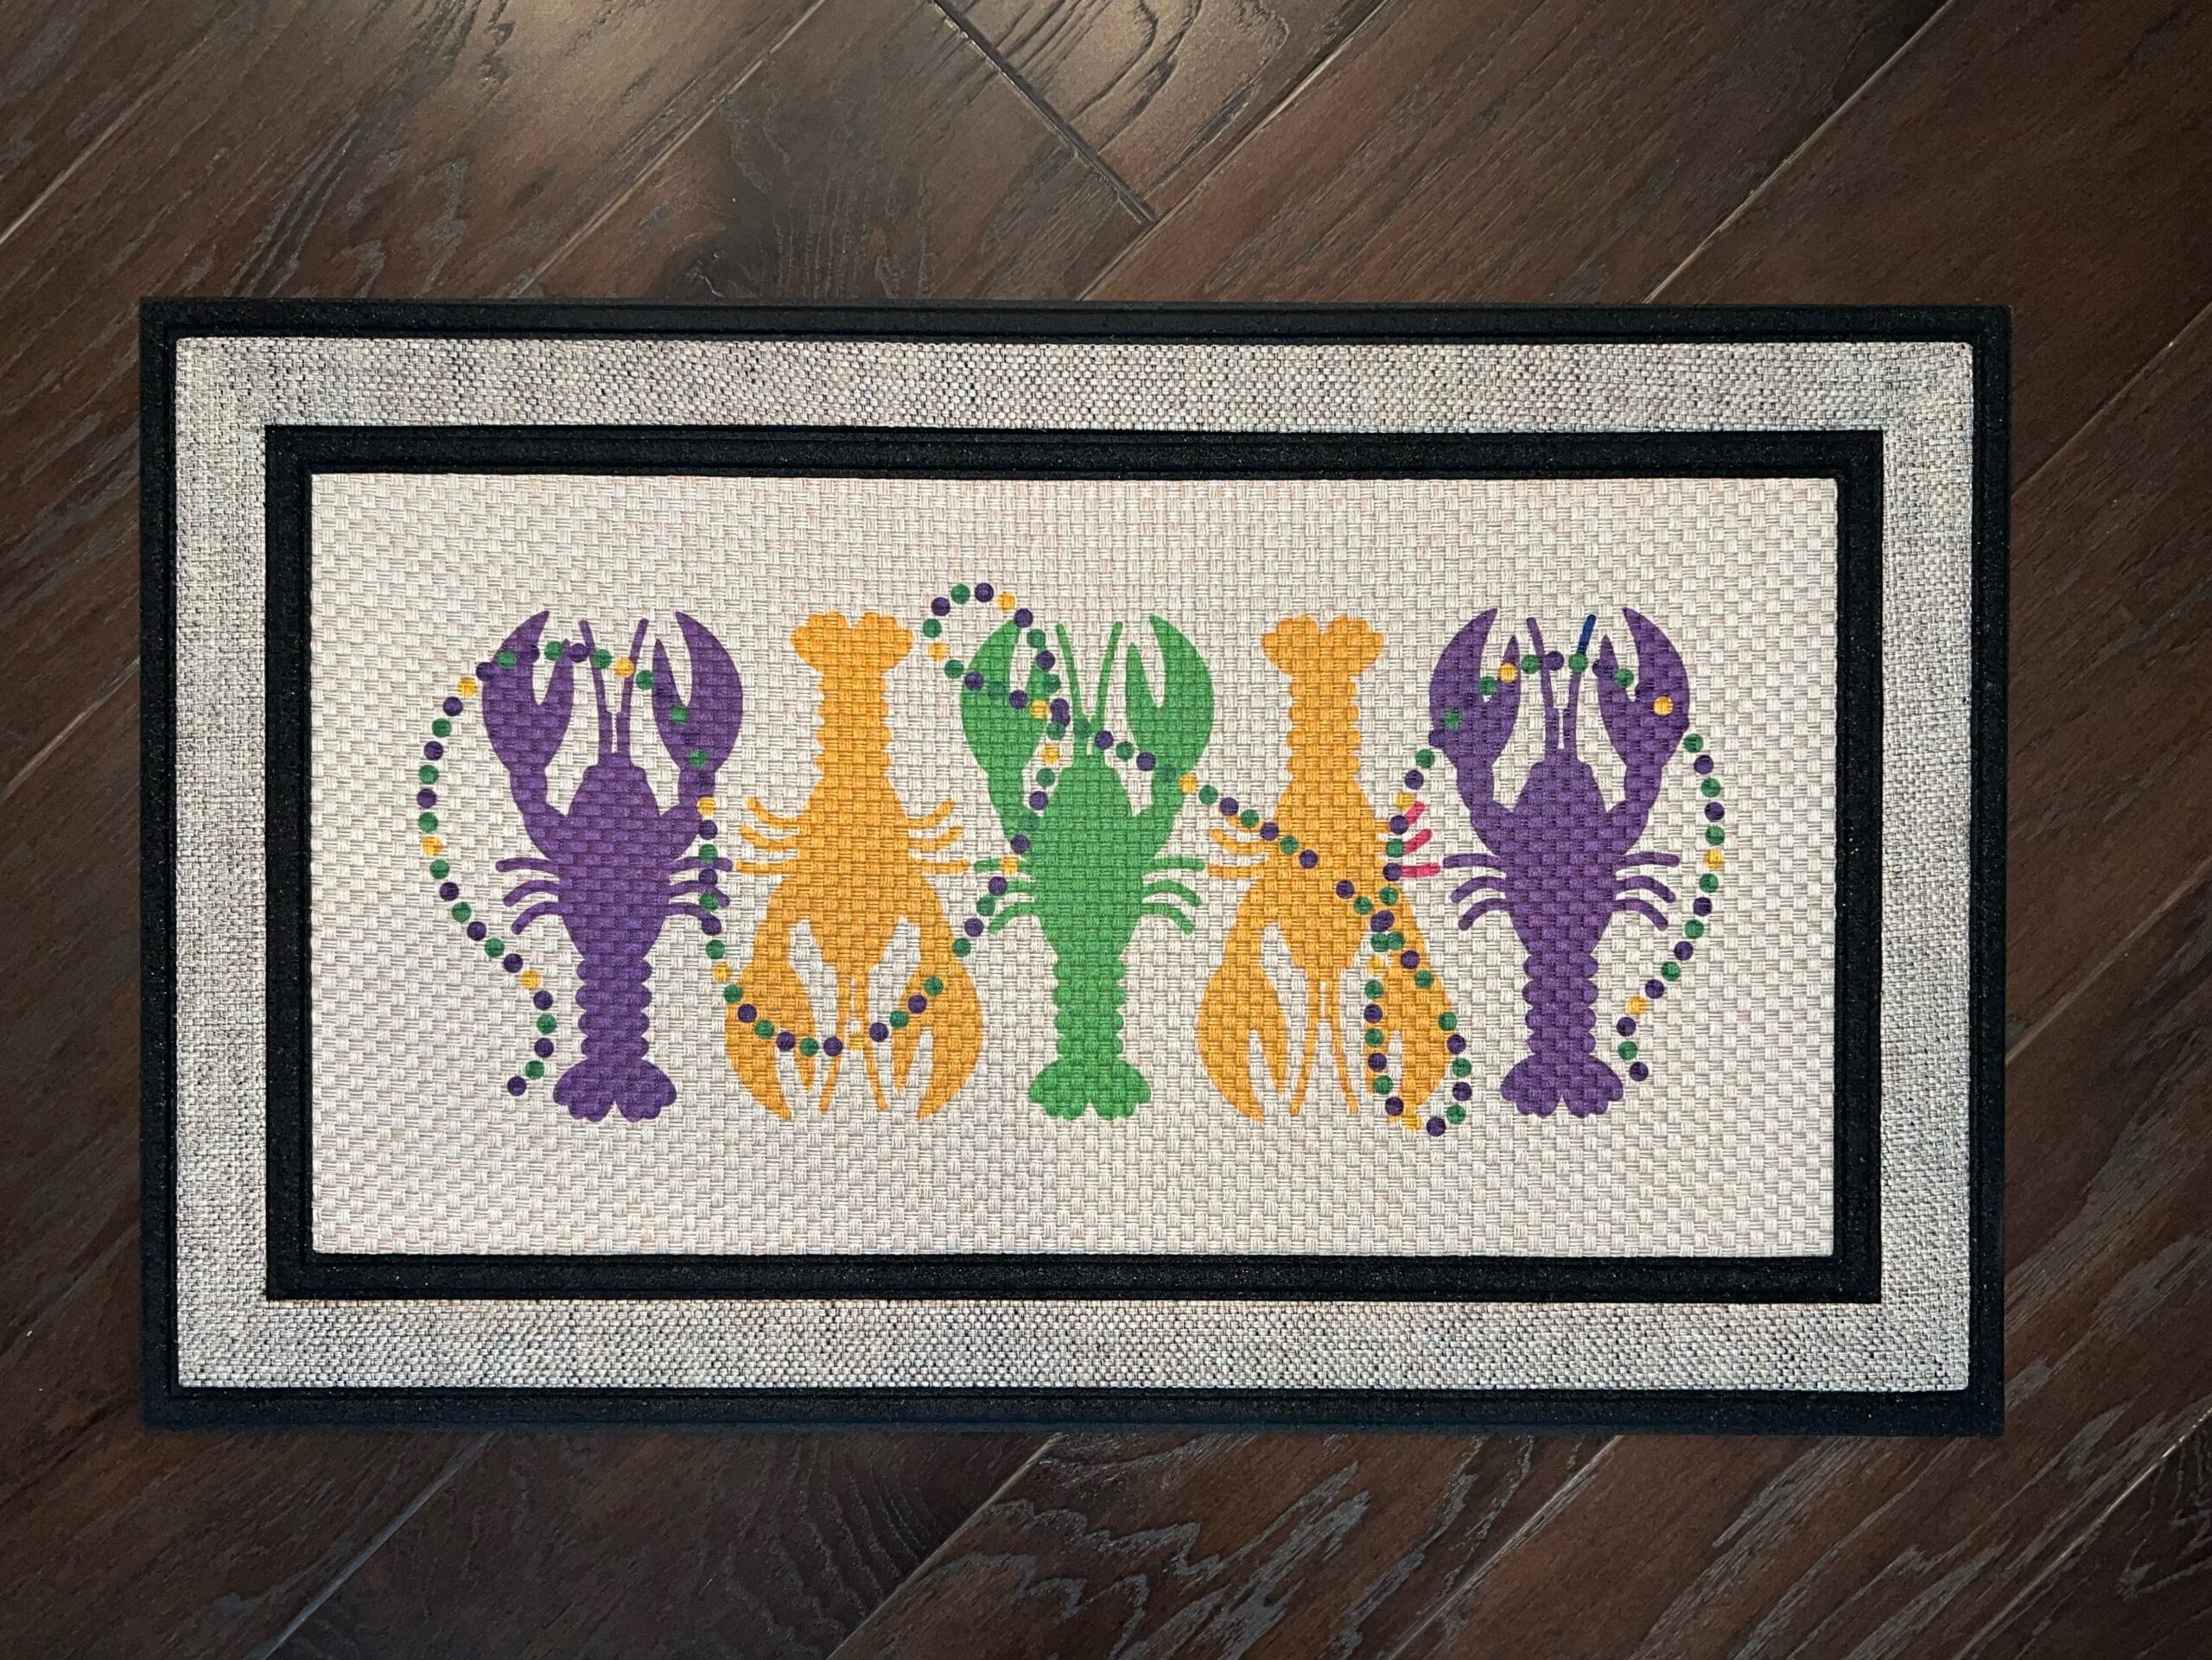 Photo of client order of a Mardi Gras themed doormat featuring crawfish & beads